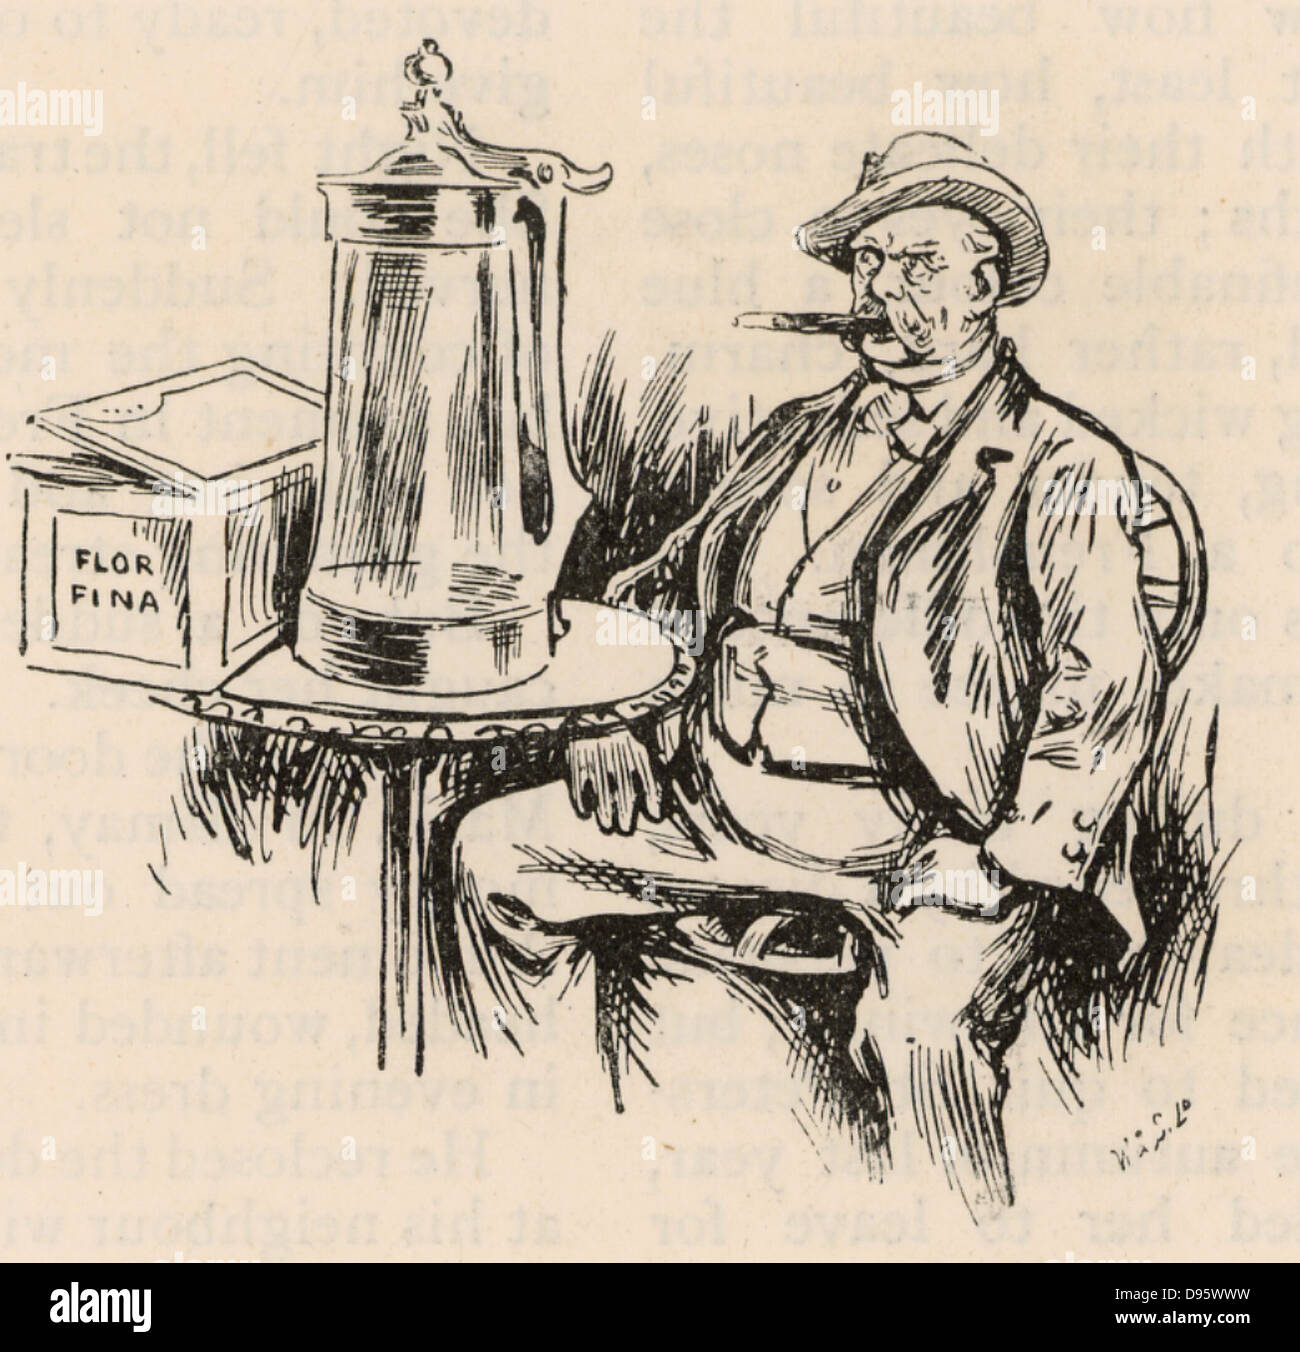 Otto Edward Leopold von Bismarck (1815-1898) German statesman.  Cartoon showing Bismarck as an archetypical German smoking a cigar and sitting at a table beside a huge Beerstein.  From 'The Strand Magazine' (London, 1891).  Engraving. Stock Photo